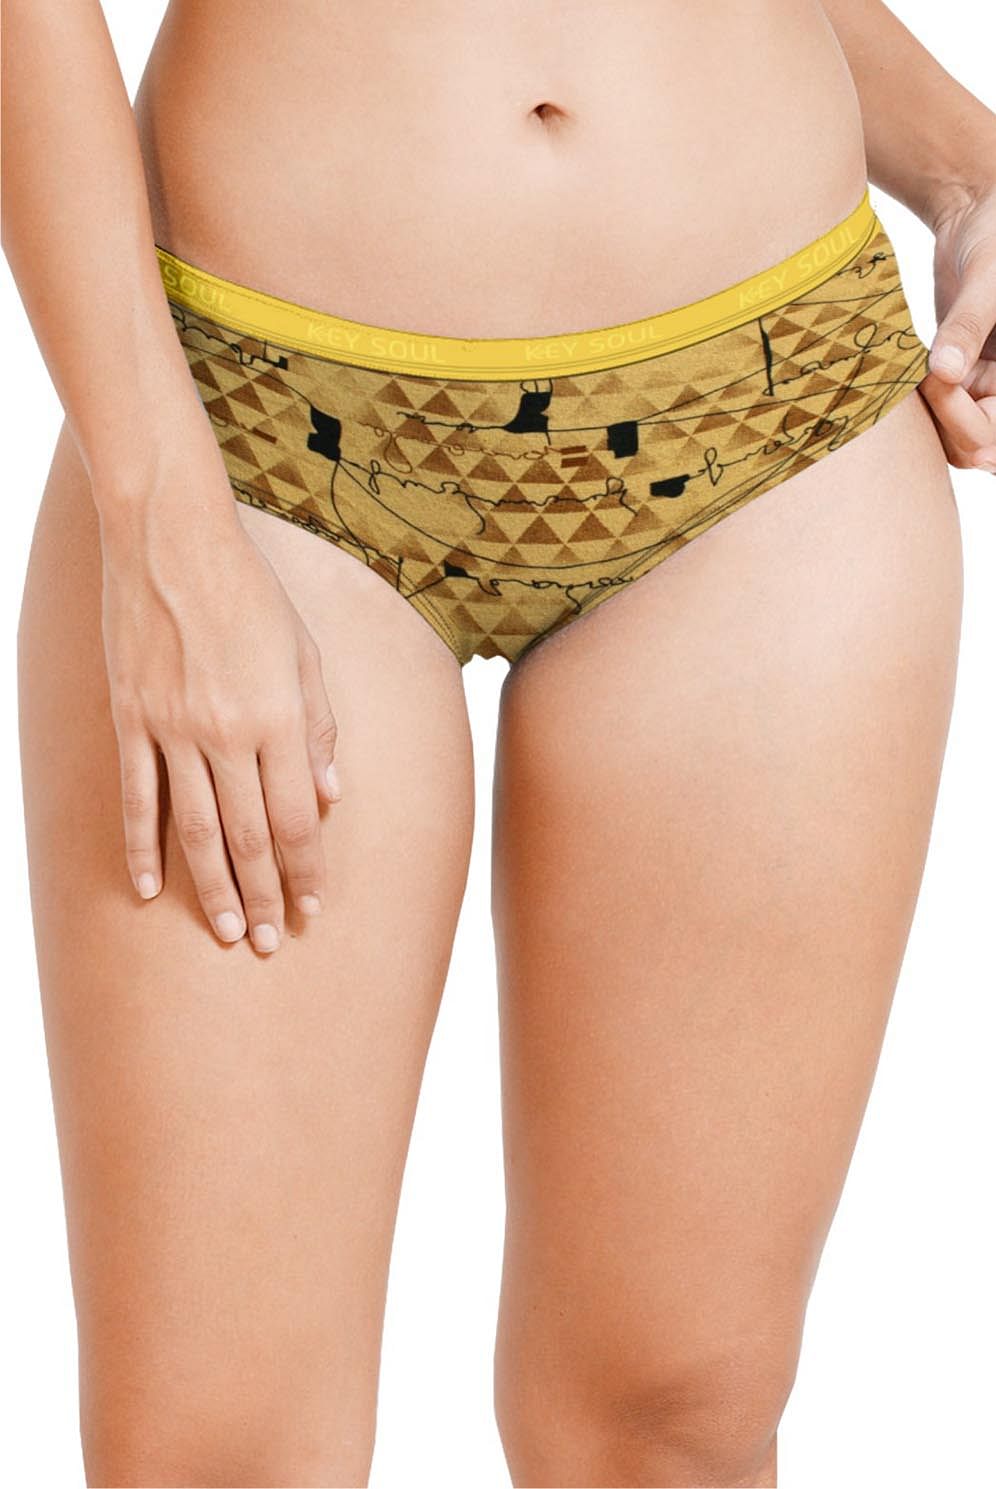 Printed Outer Elastic Panty Pack of 3 - KS002 - Pack - 29 - 3xl/105